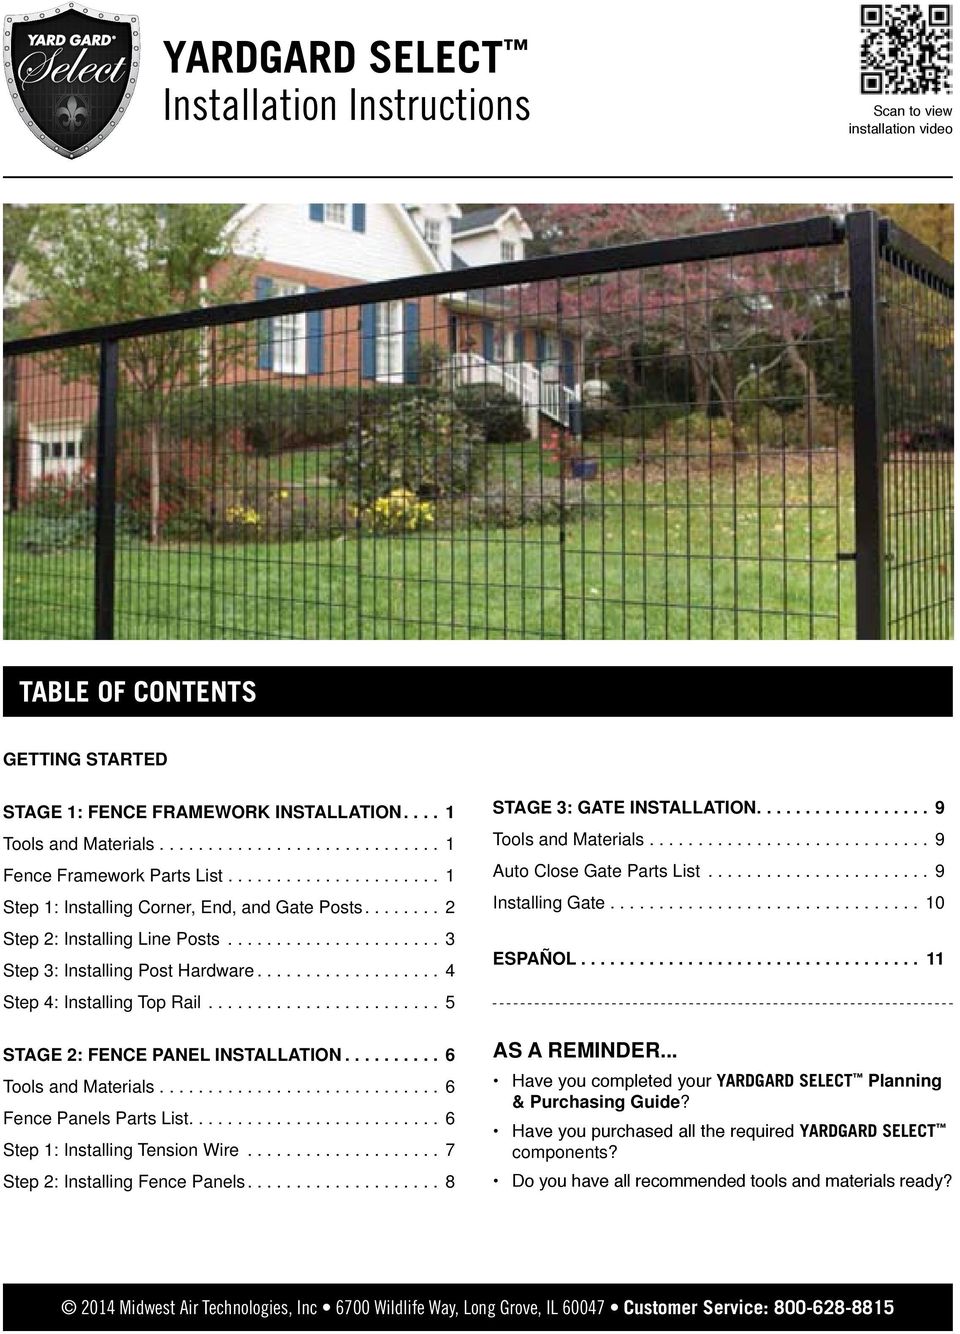 ... 6 Fence Panels Parts List.......................... 6 Step : Installing Tension Wire... 7 Step : Installing Fence Panels.... 8 STAGE : GATE INSTALLATION.... 9 Tools and Materials.